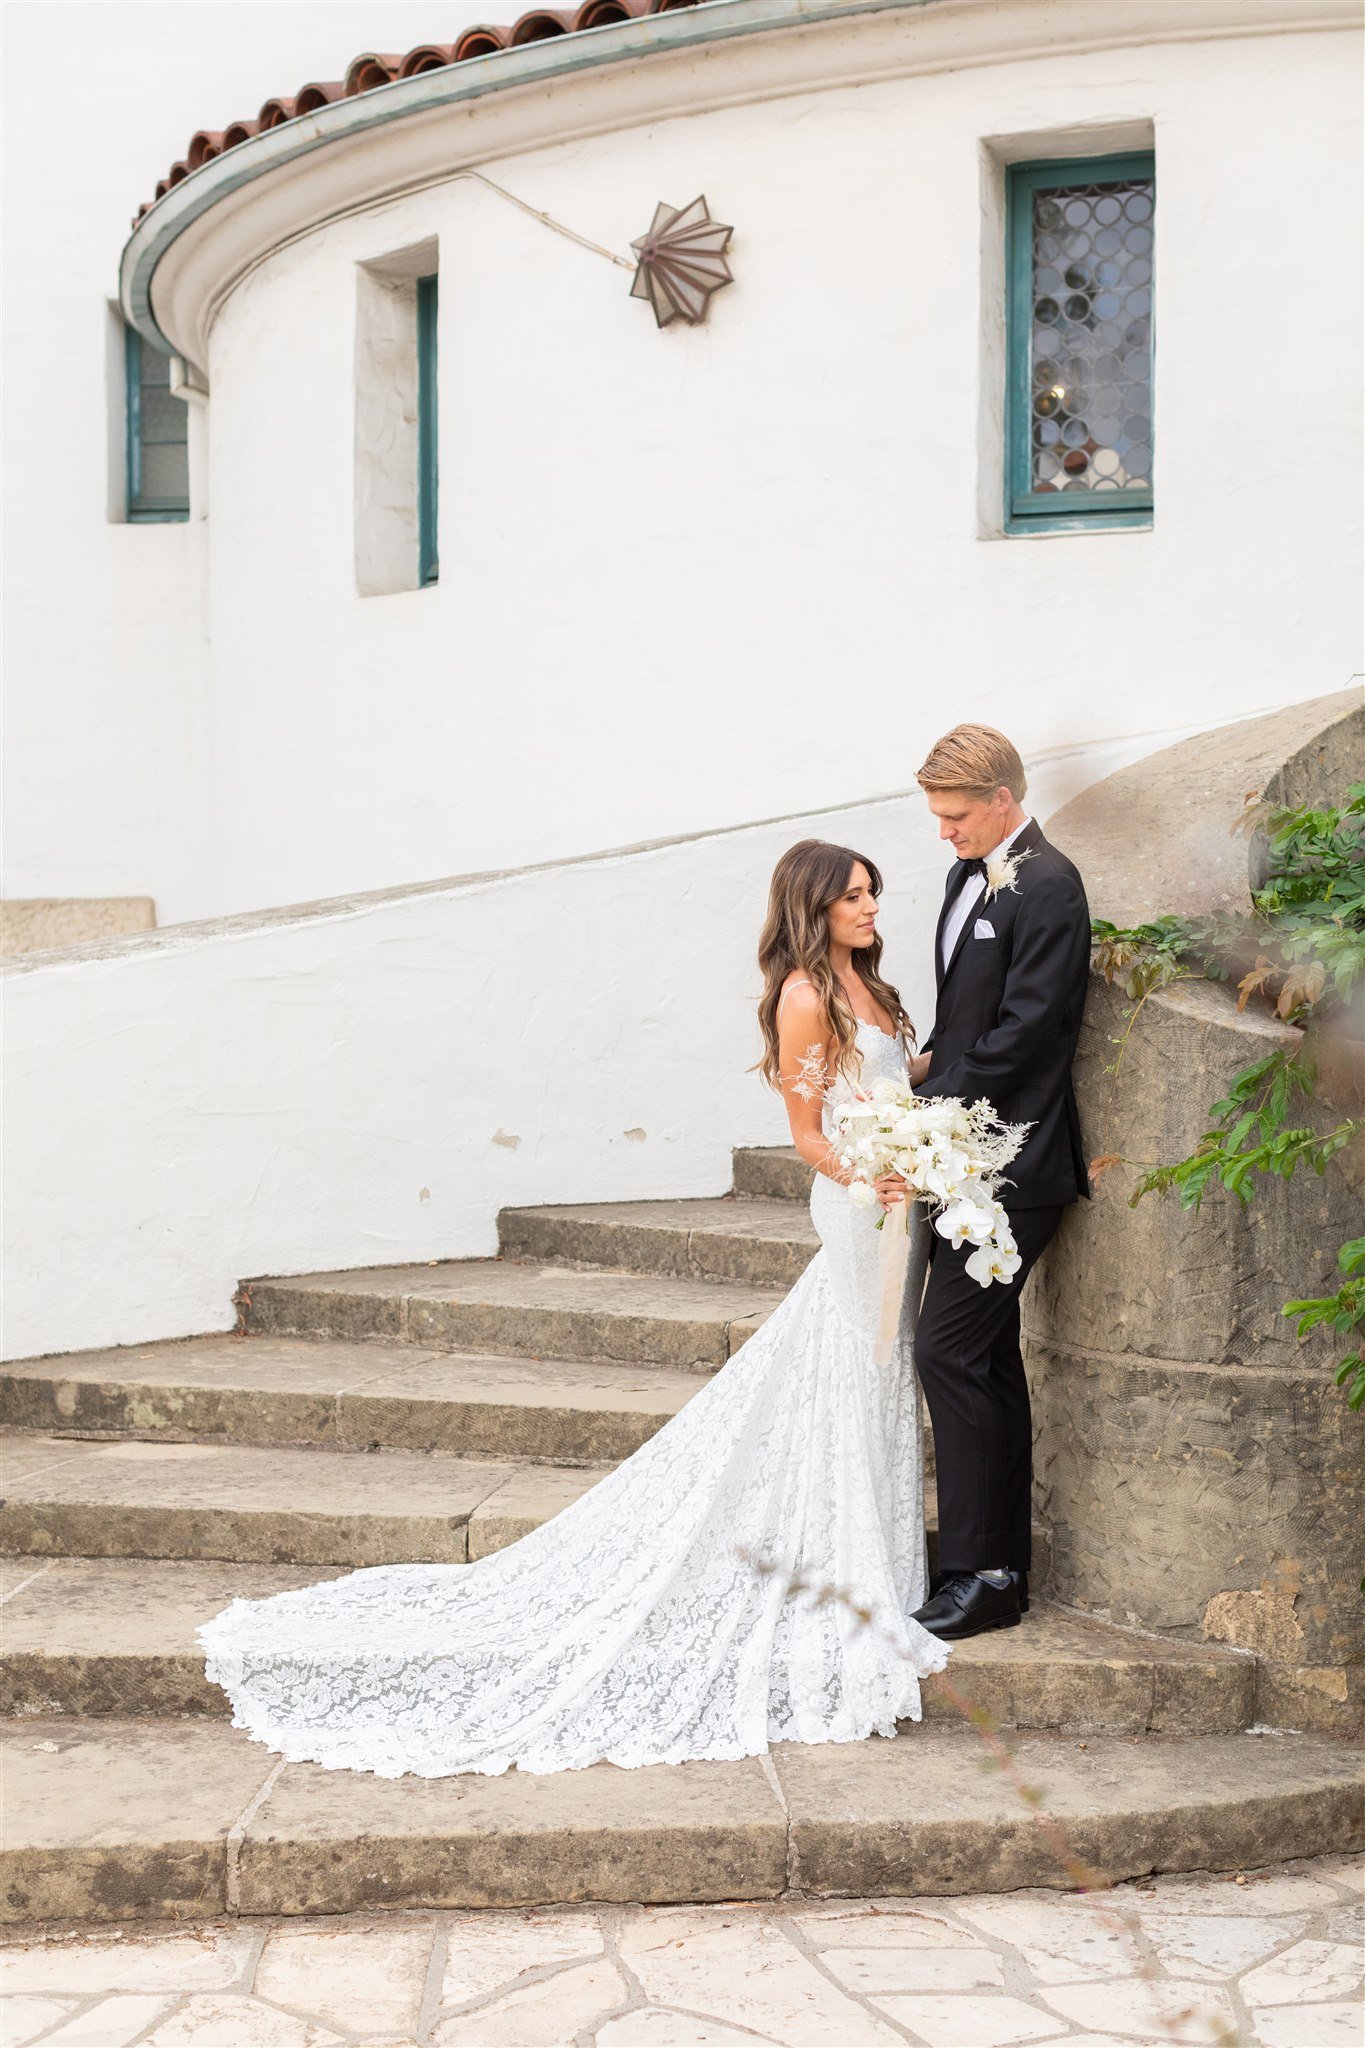 www.santabarbarawedding.com | Events by Fran | Wonder Tribe | Santa Barbara Courthouse | Beauty by Leah Rose | Amari Salon &amp; Spa | Wild West Florals | Bride and Groom on Steps